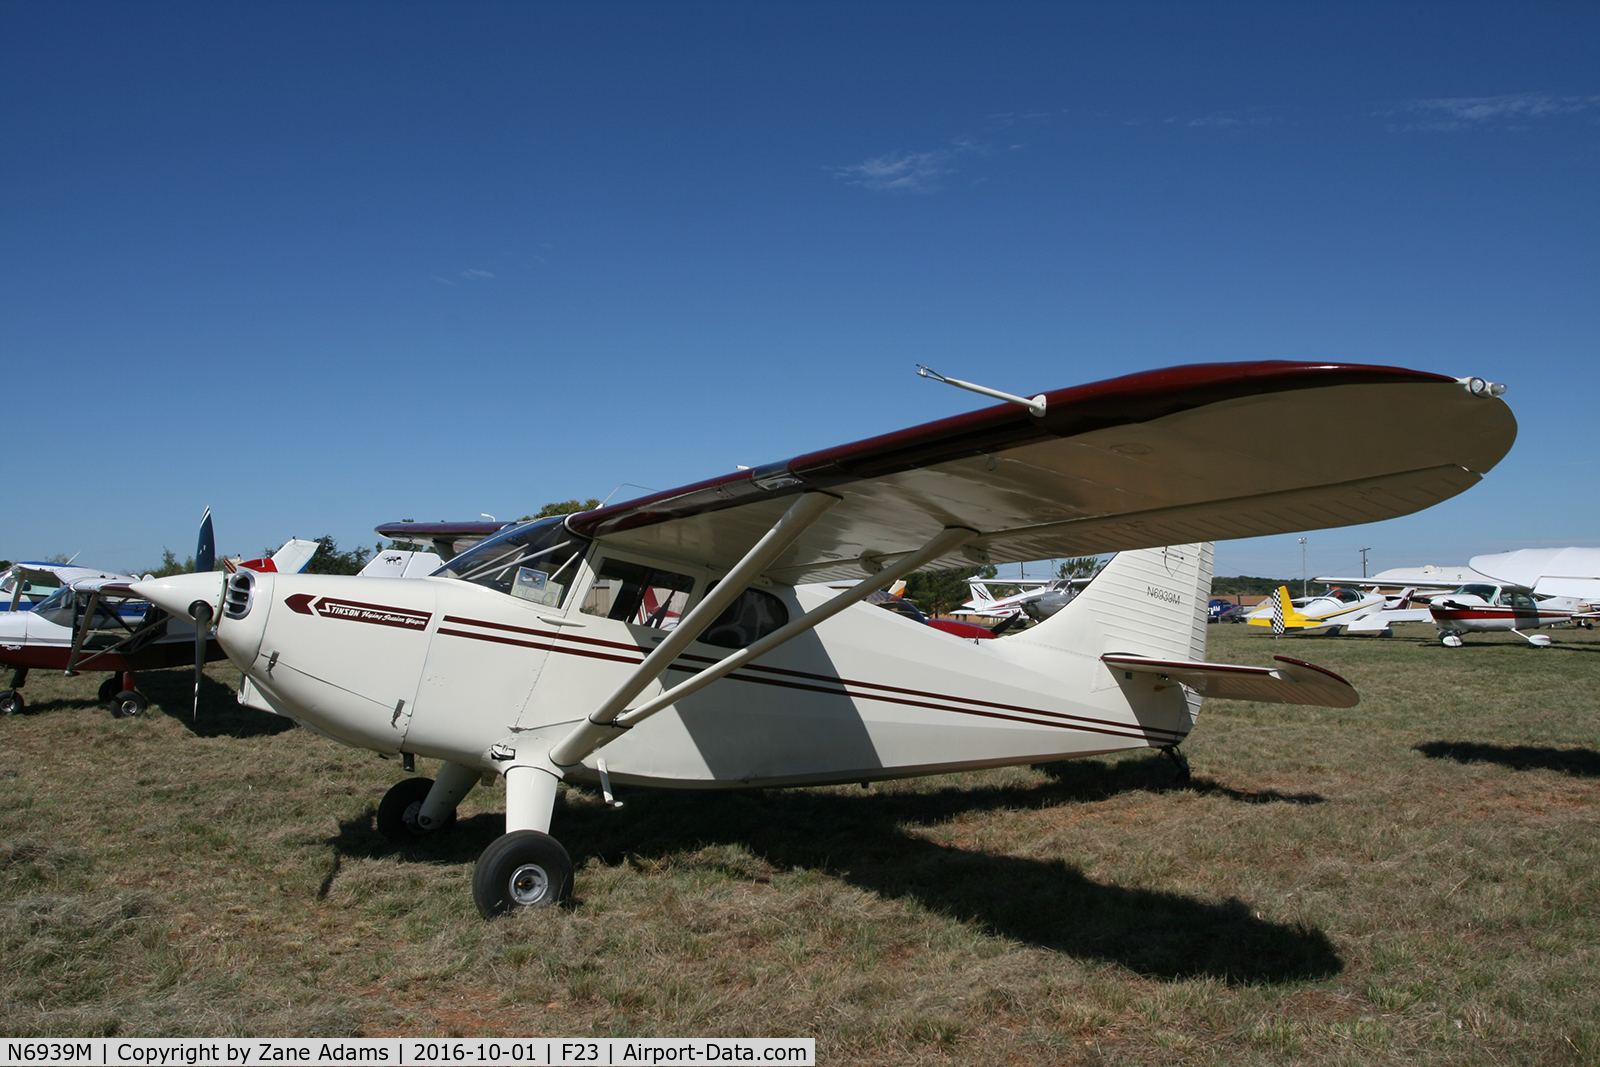 N6939M, 1950 Stinson 108-3 Voyager C/N 108-4939, At the 2016 Ranger, Texas Fly-in